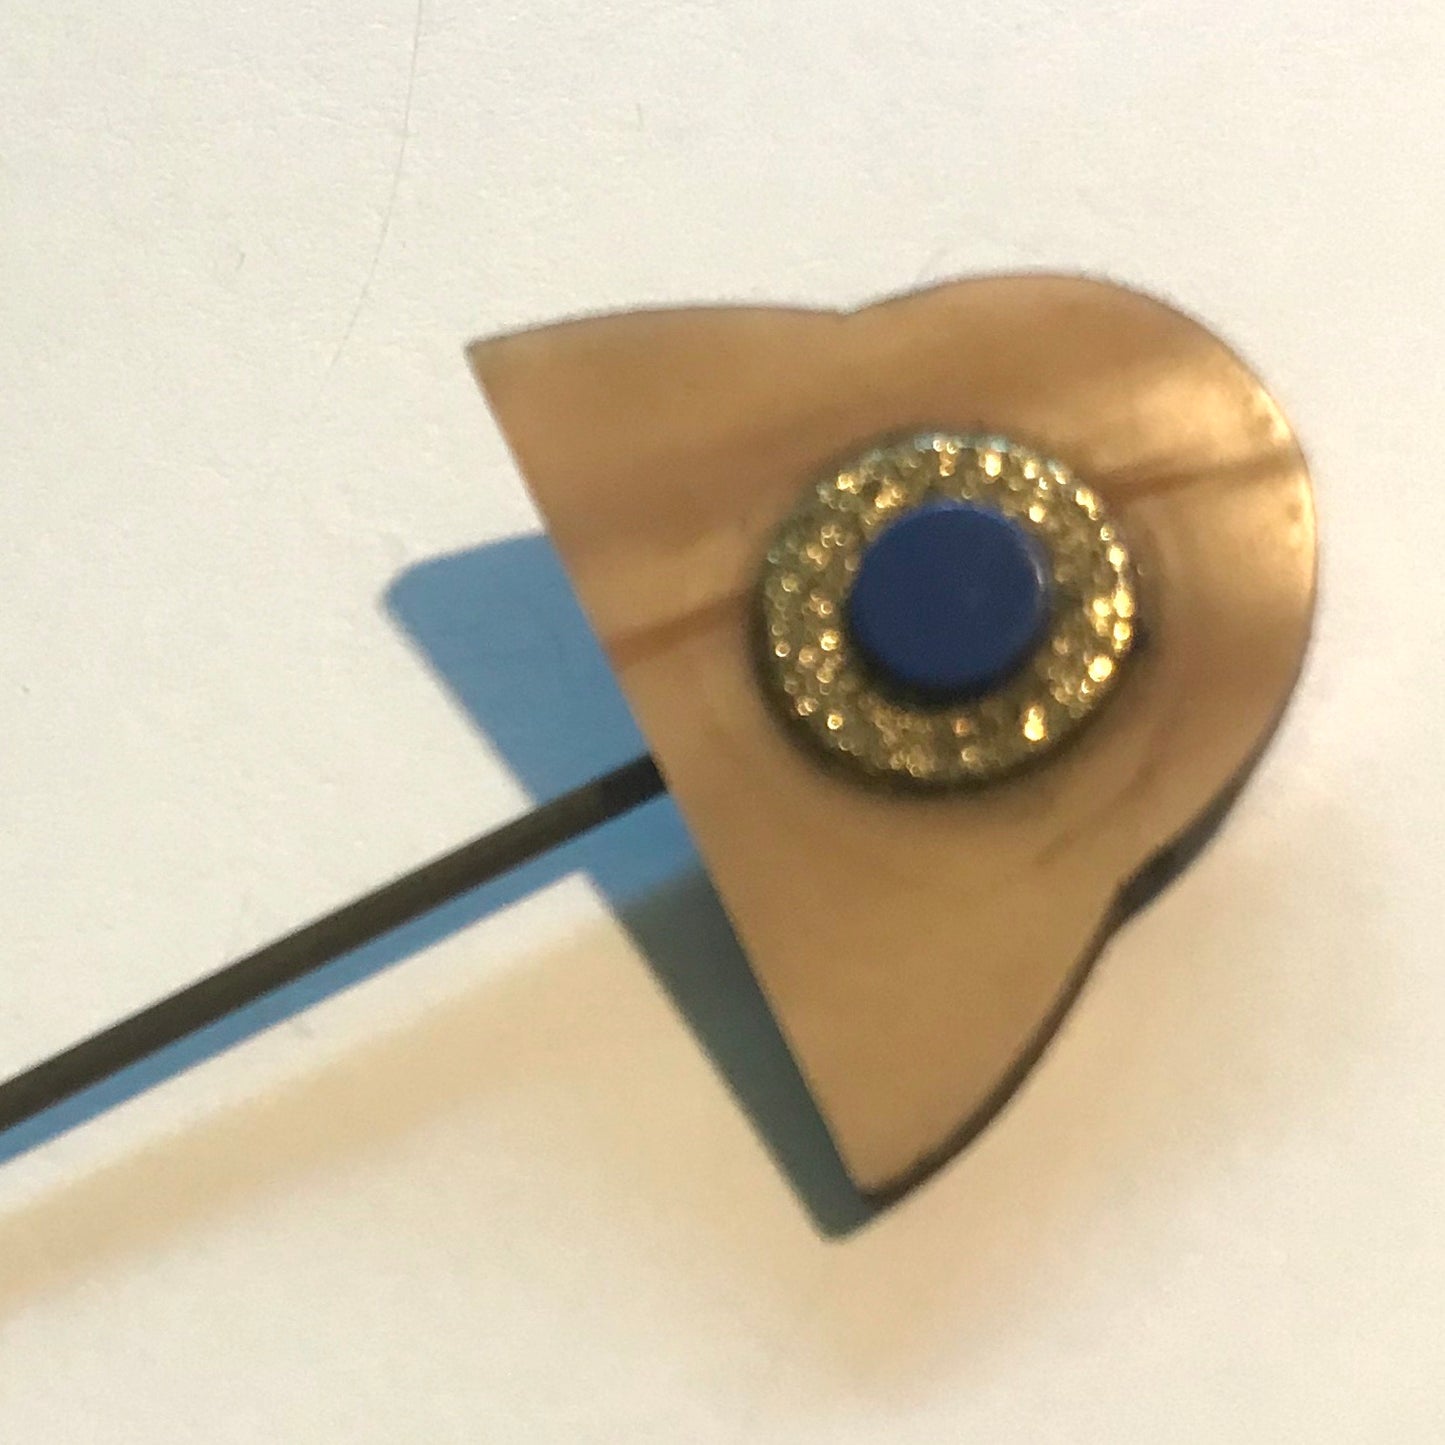 Blue Eye Surrealist Celluloid Hat or Stick Pin circa 1930s